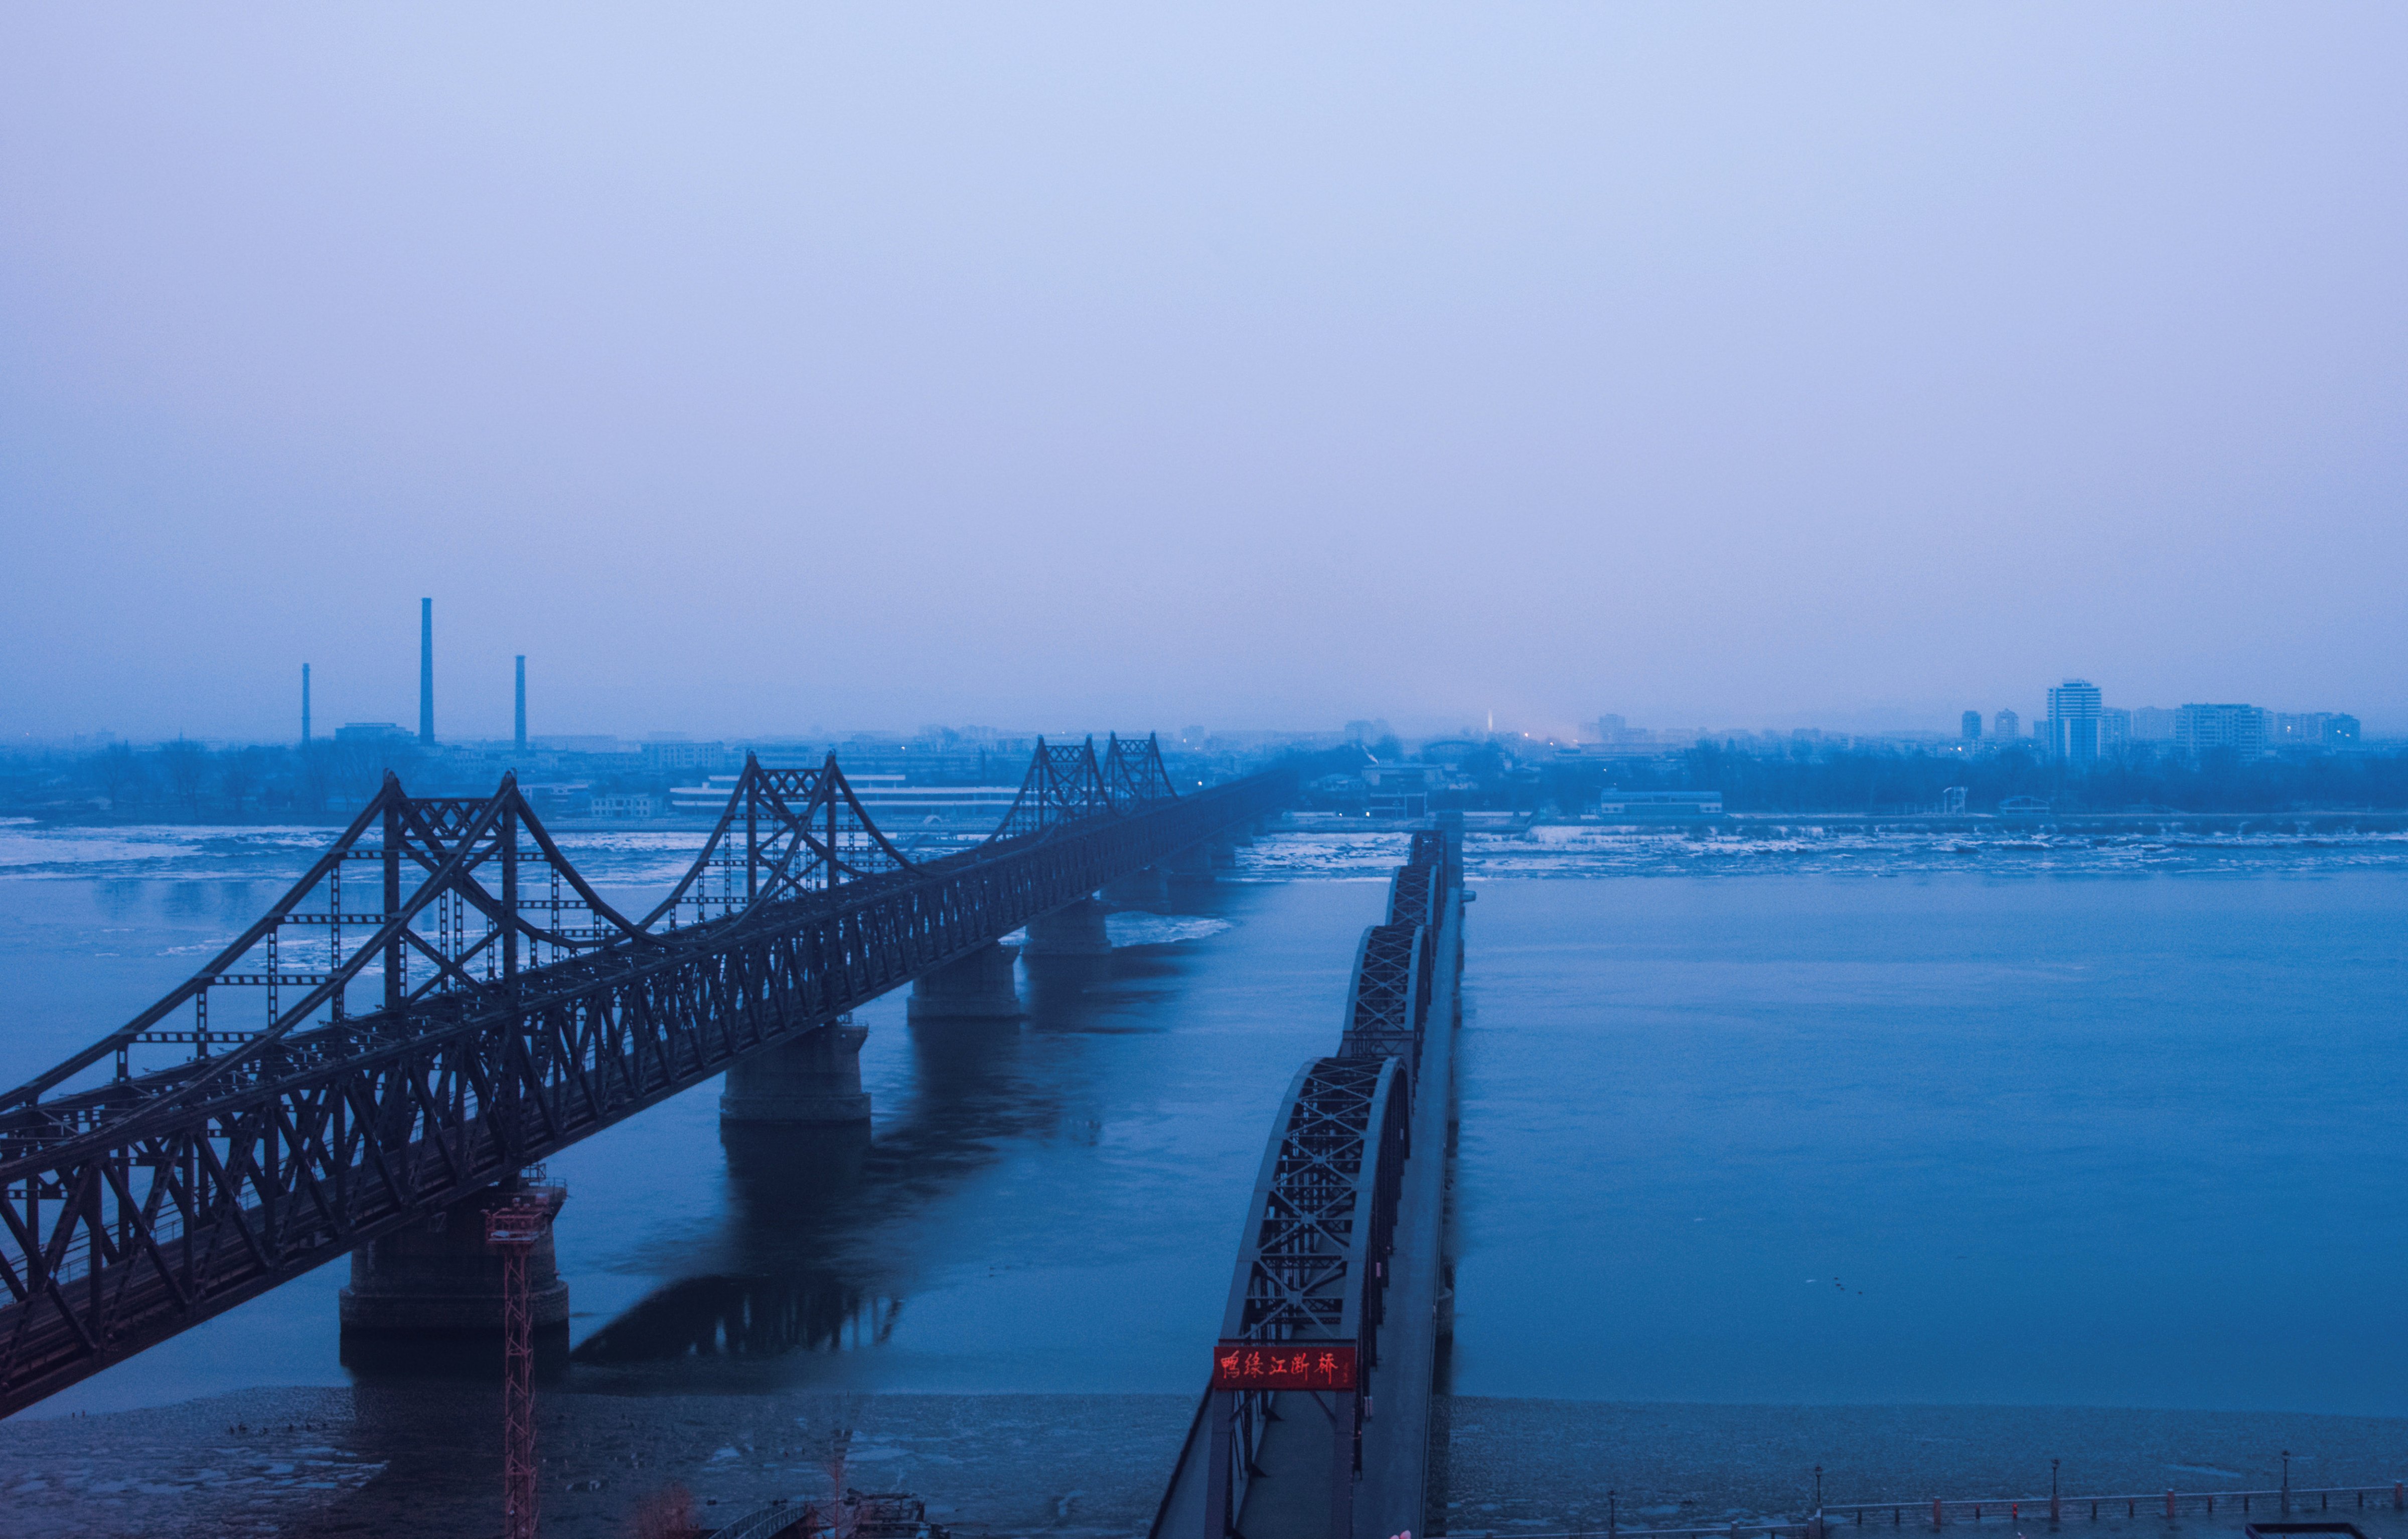 Fog is seen on the banks of the Yalu River in the Chinese border town of Dandong, opposite to the North Korean town of Sinuiju, on February 8, 2016. The UN Security Council strongly condemned North Korea's rocket launch on February 7 and agreed to move quickly to impose new sanctions that will punish Pyongyang for "these dangerous and serious violations." (JOHANNES EISELE—AFP/Getty Images)